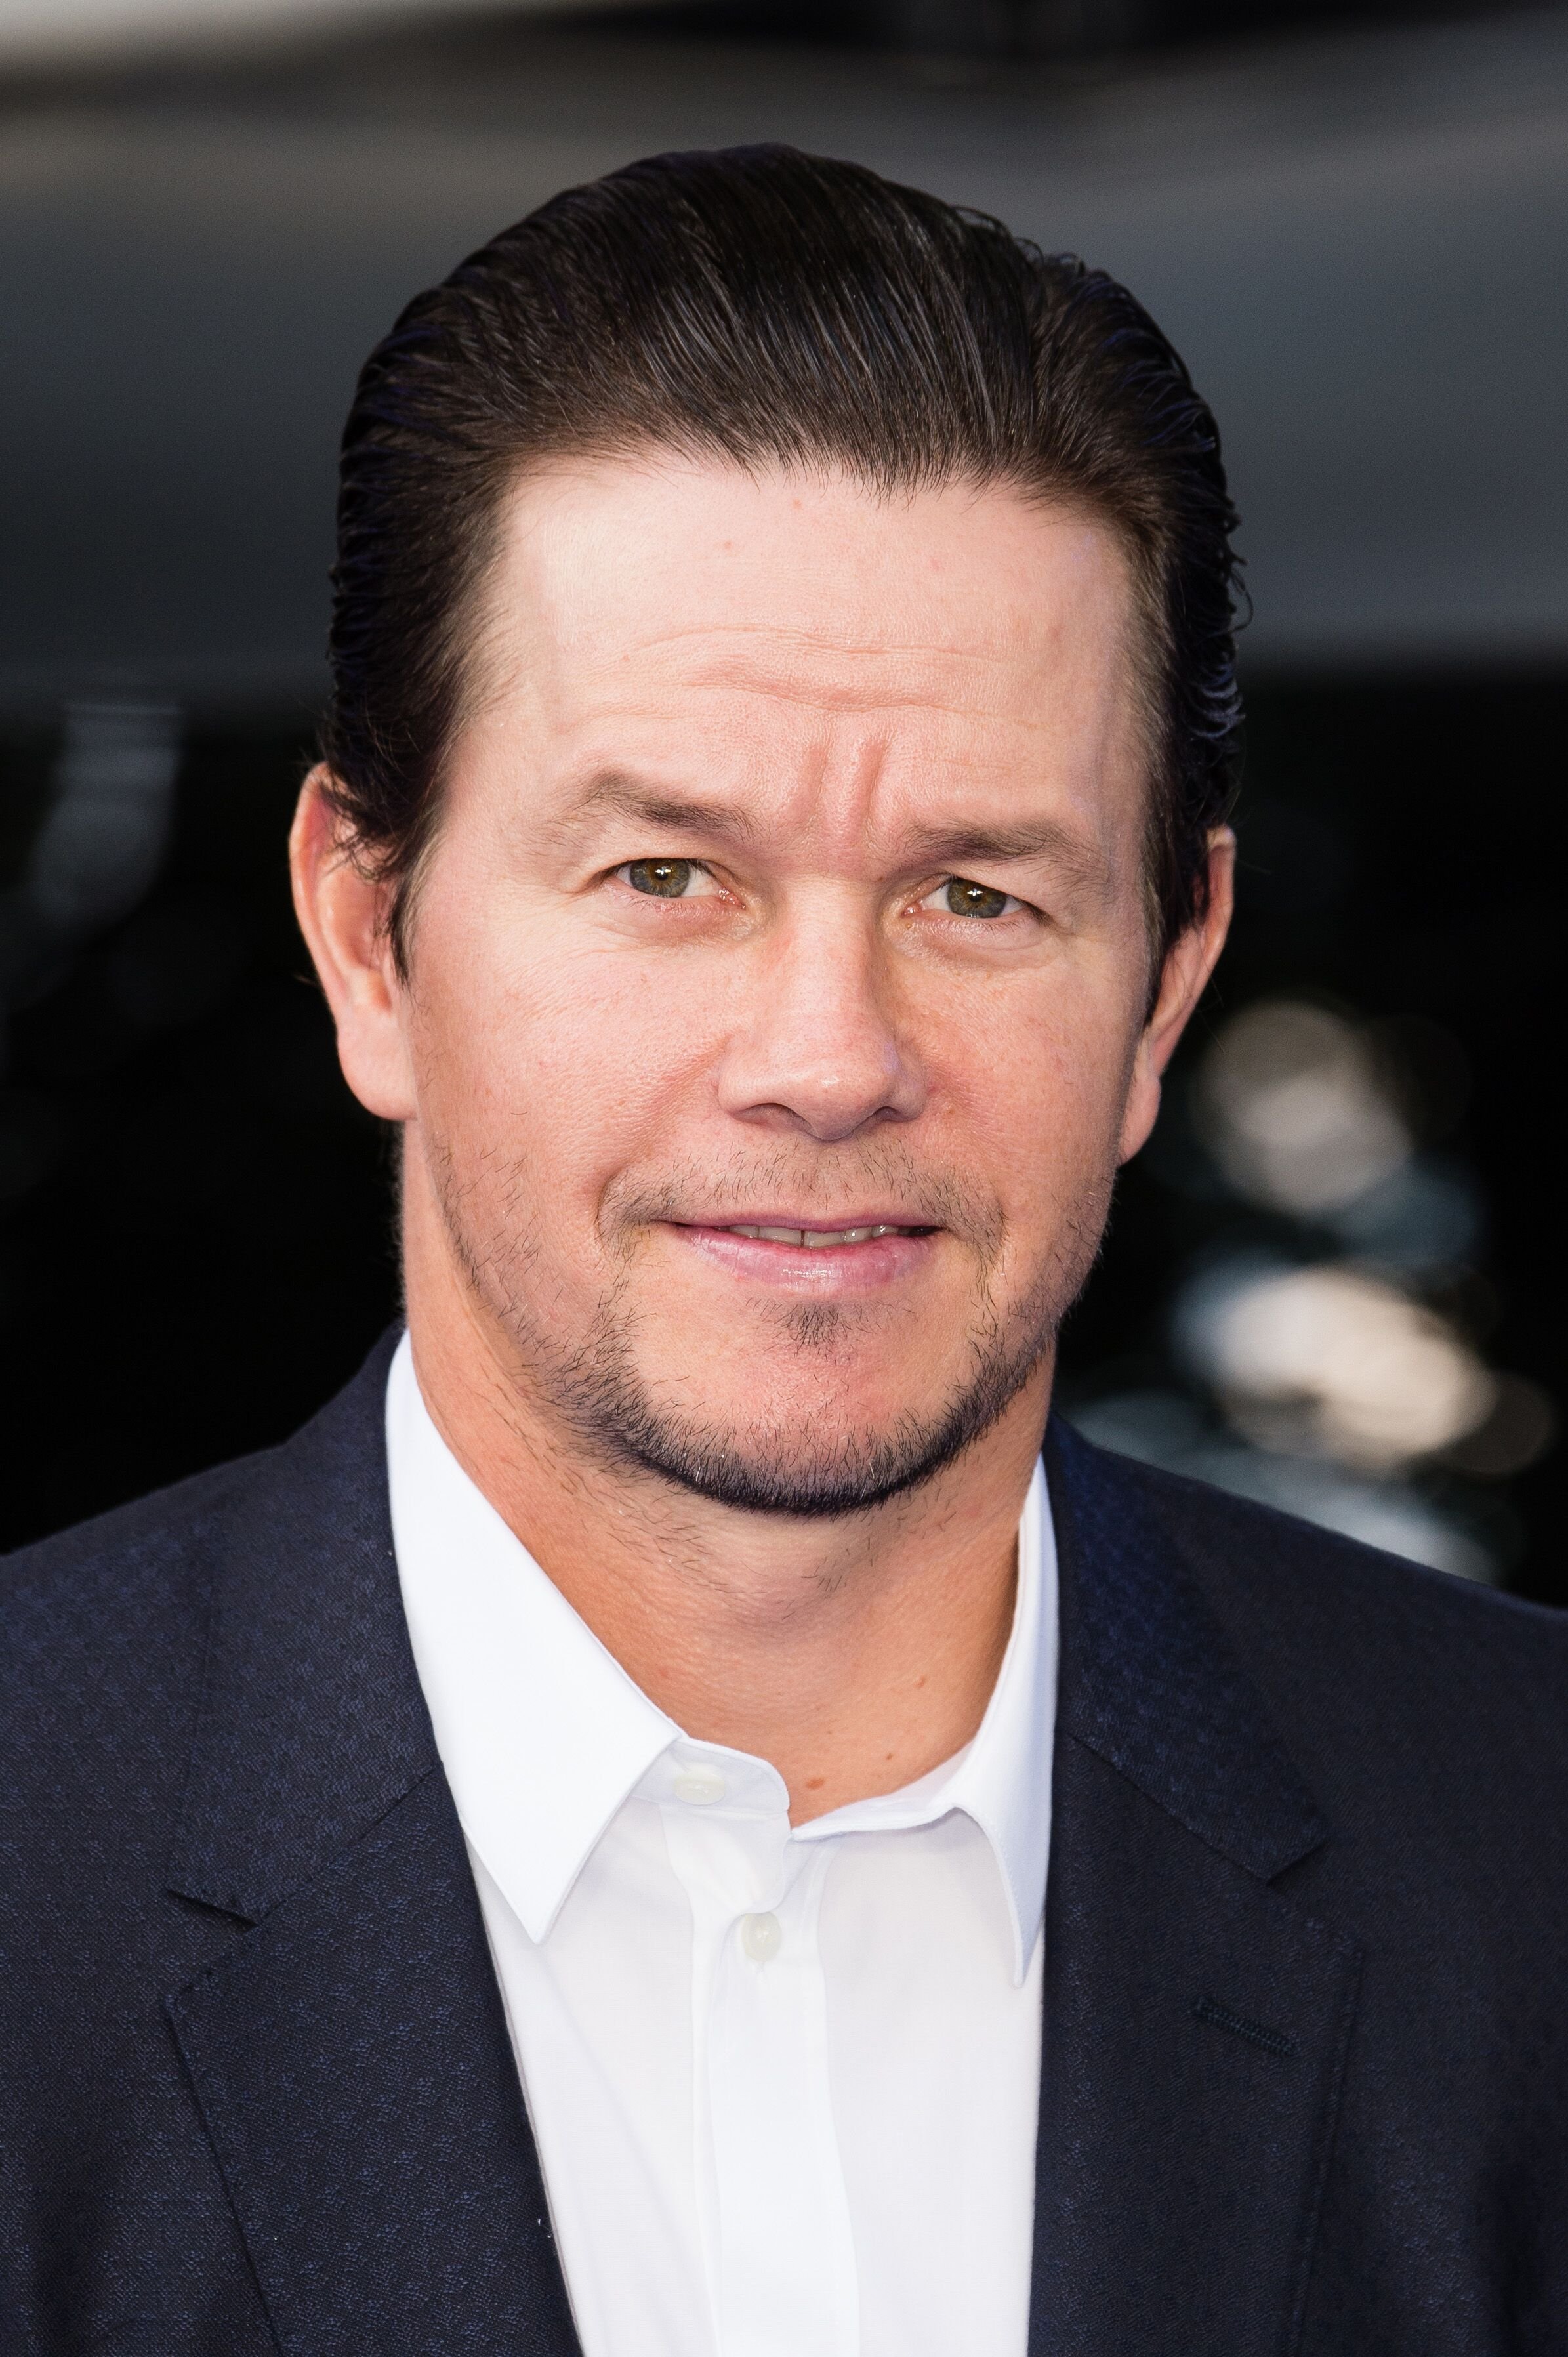 Mark Wahlberg attends the global premiere of "Transformers: The Last Knight" at Cineworld Leicester Square on June 18, 2017 in London, England | Photo: Getty Images